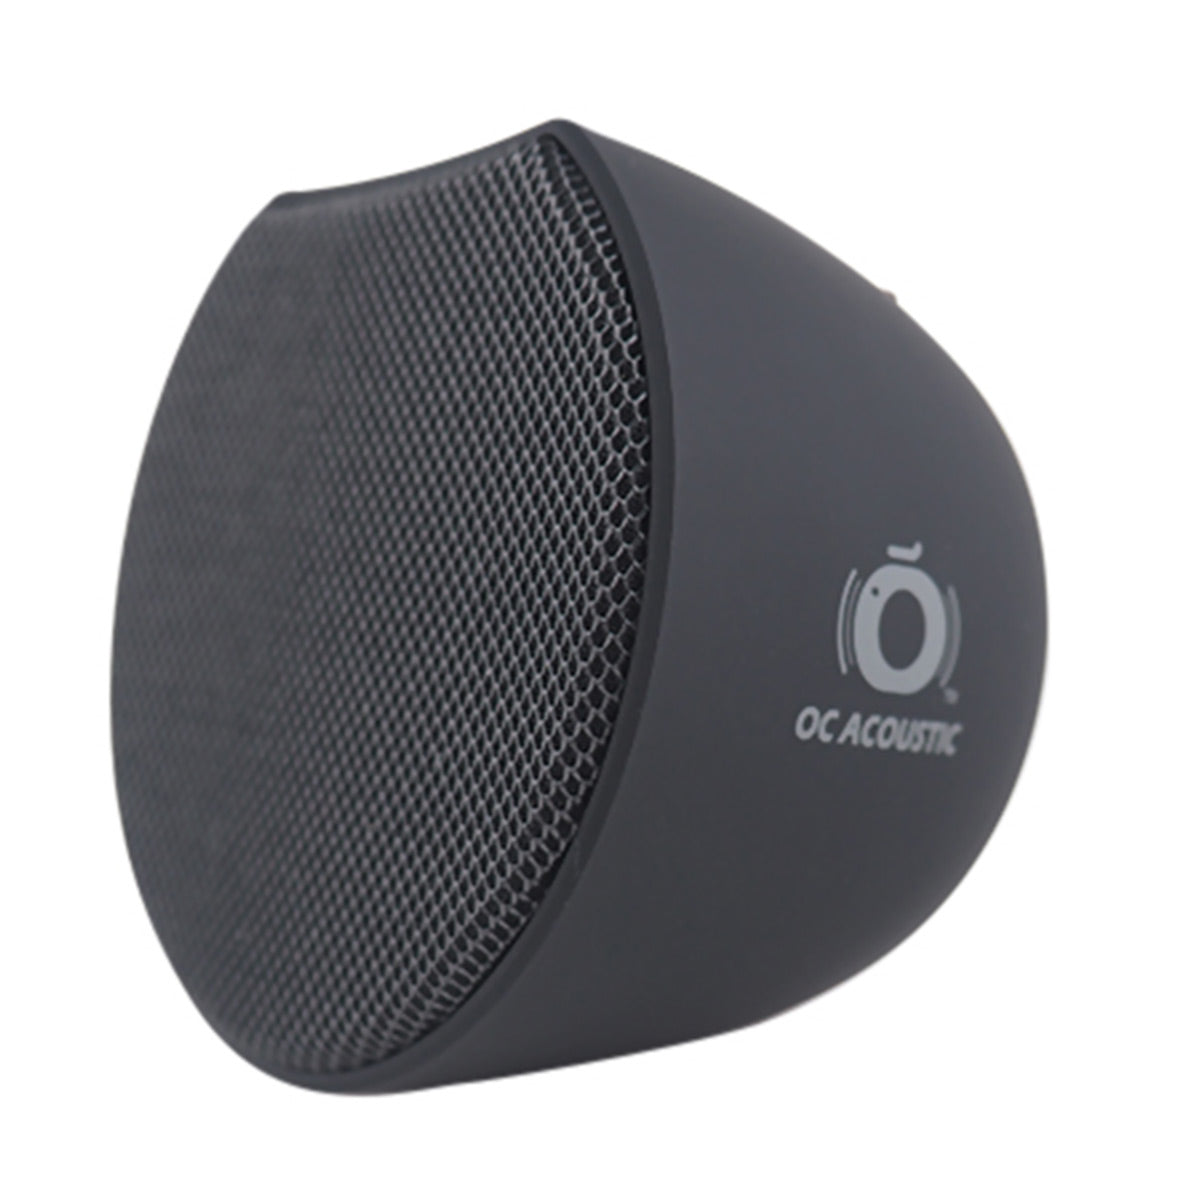 OC Acoustic Newport Plug-in Outlet Wireless Bluetooth Speaker with Built-in USB Type-A Charging (Black)